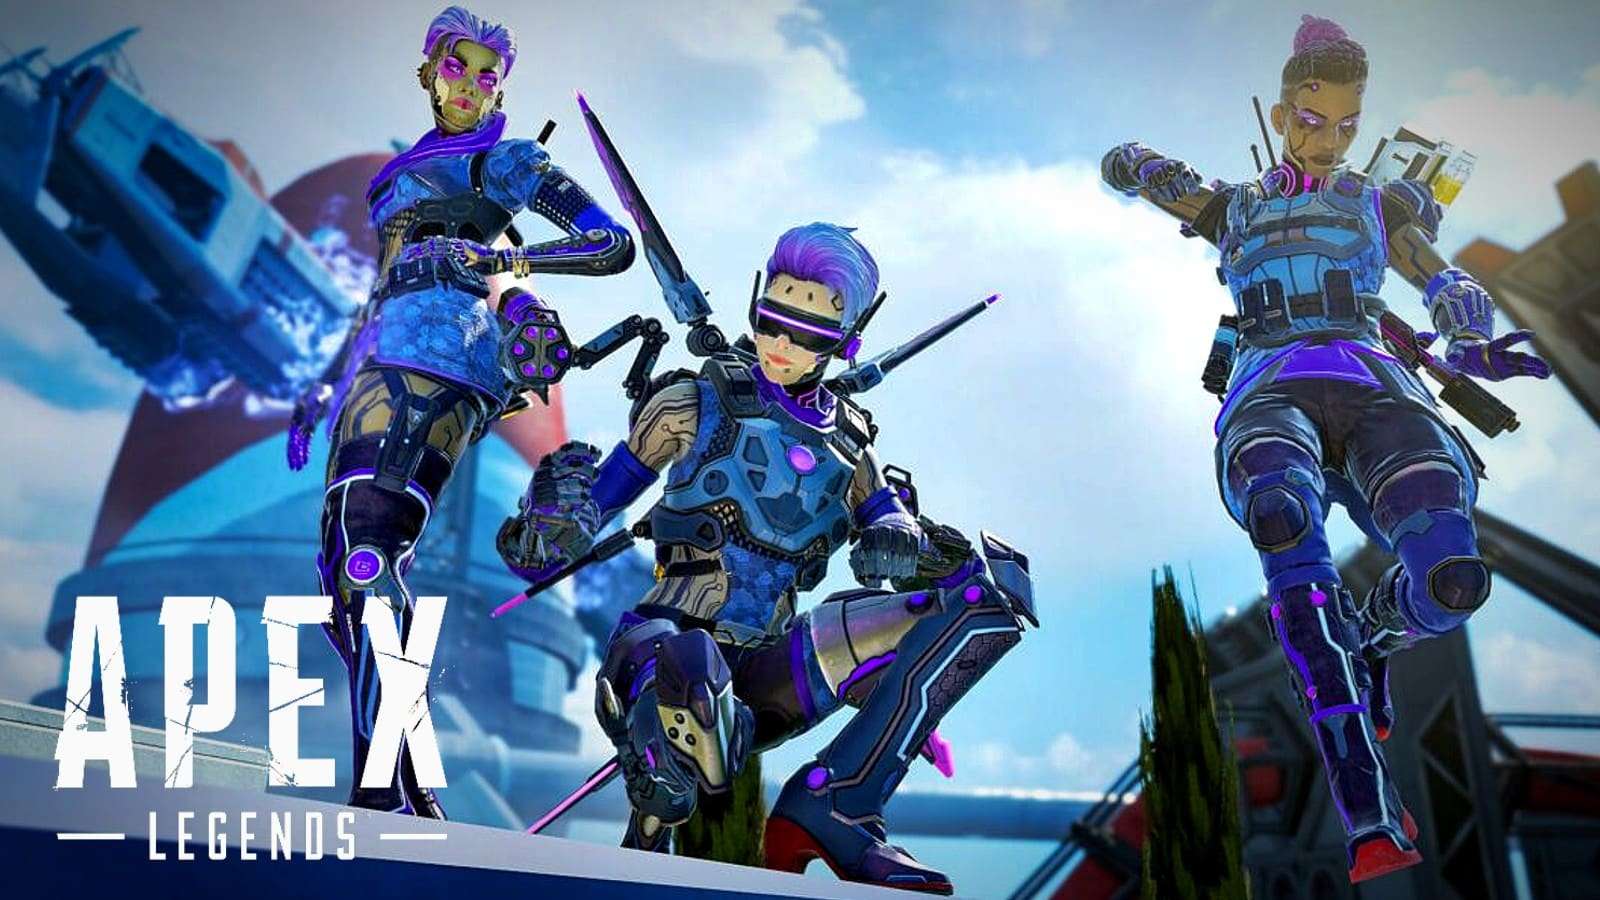 Apex Legends Free For All mode